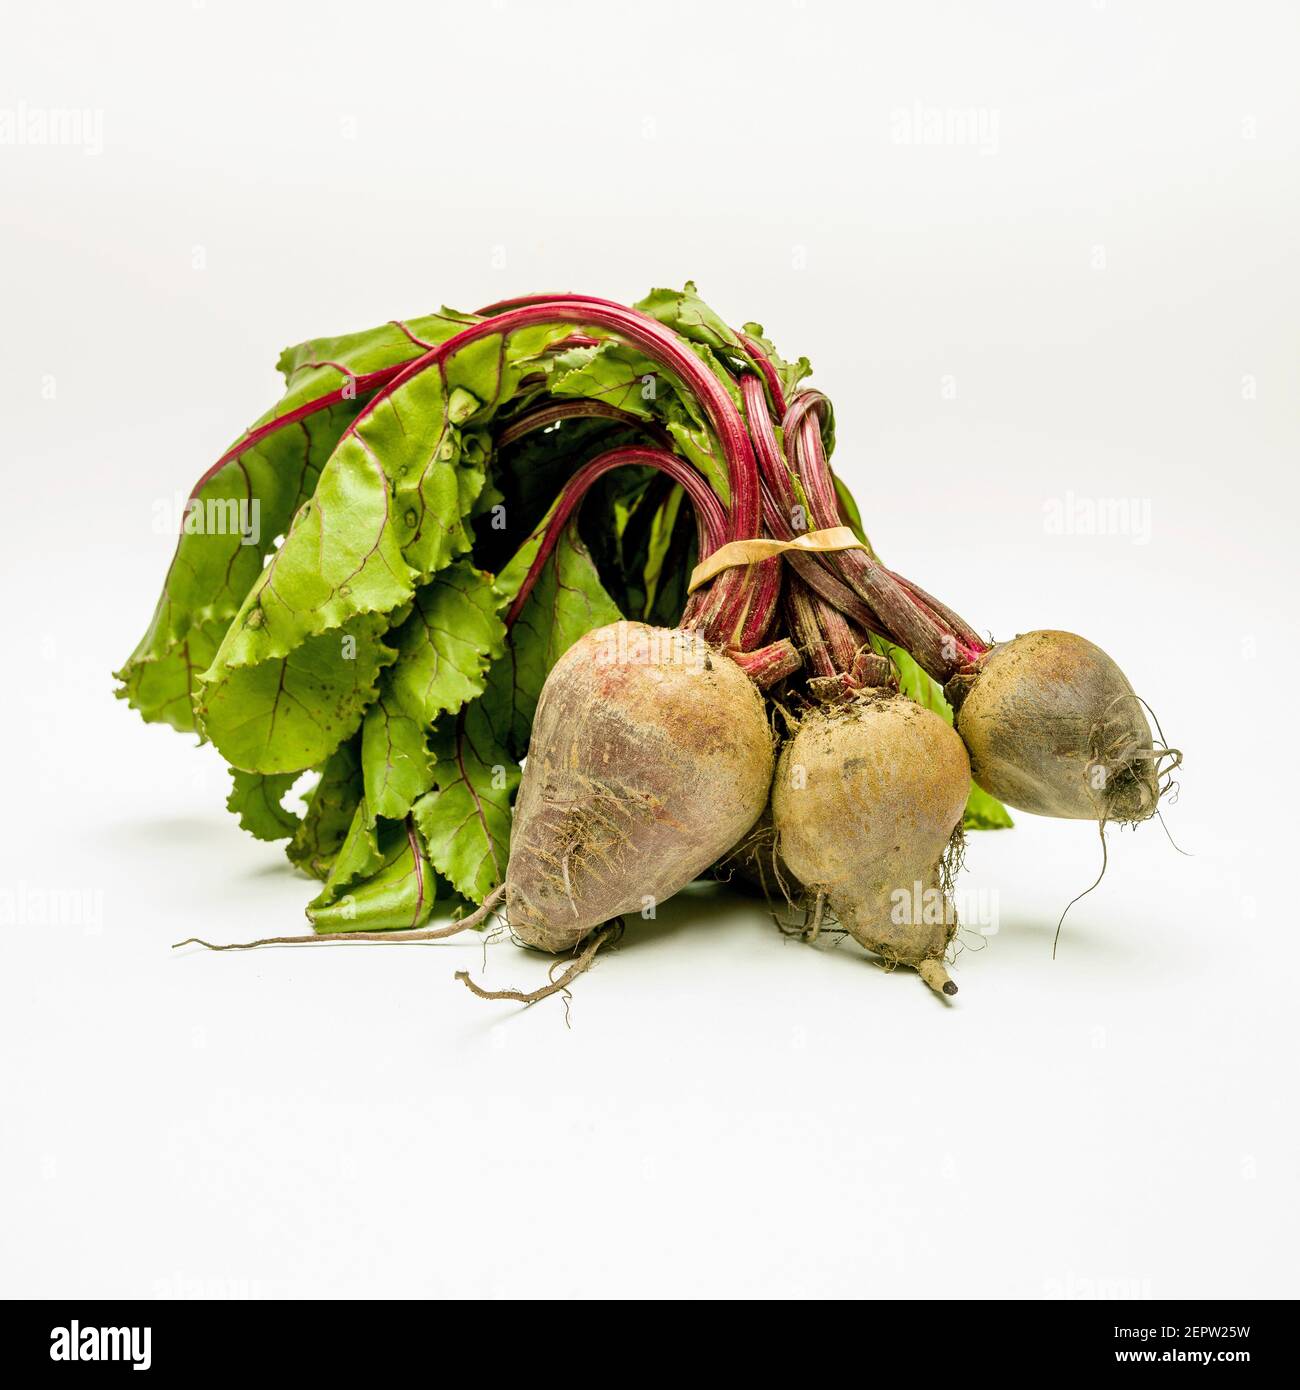 Red beets on white background Stock Photo